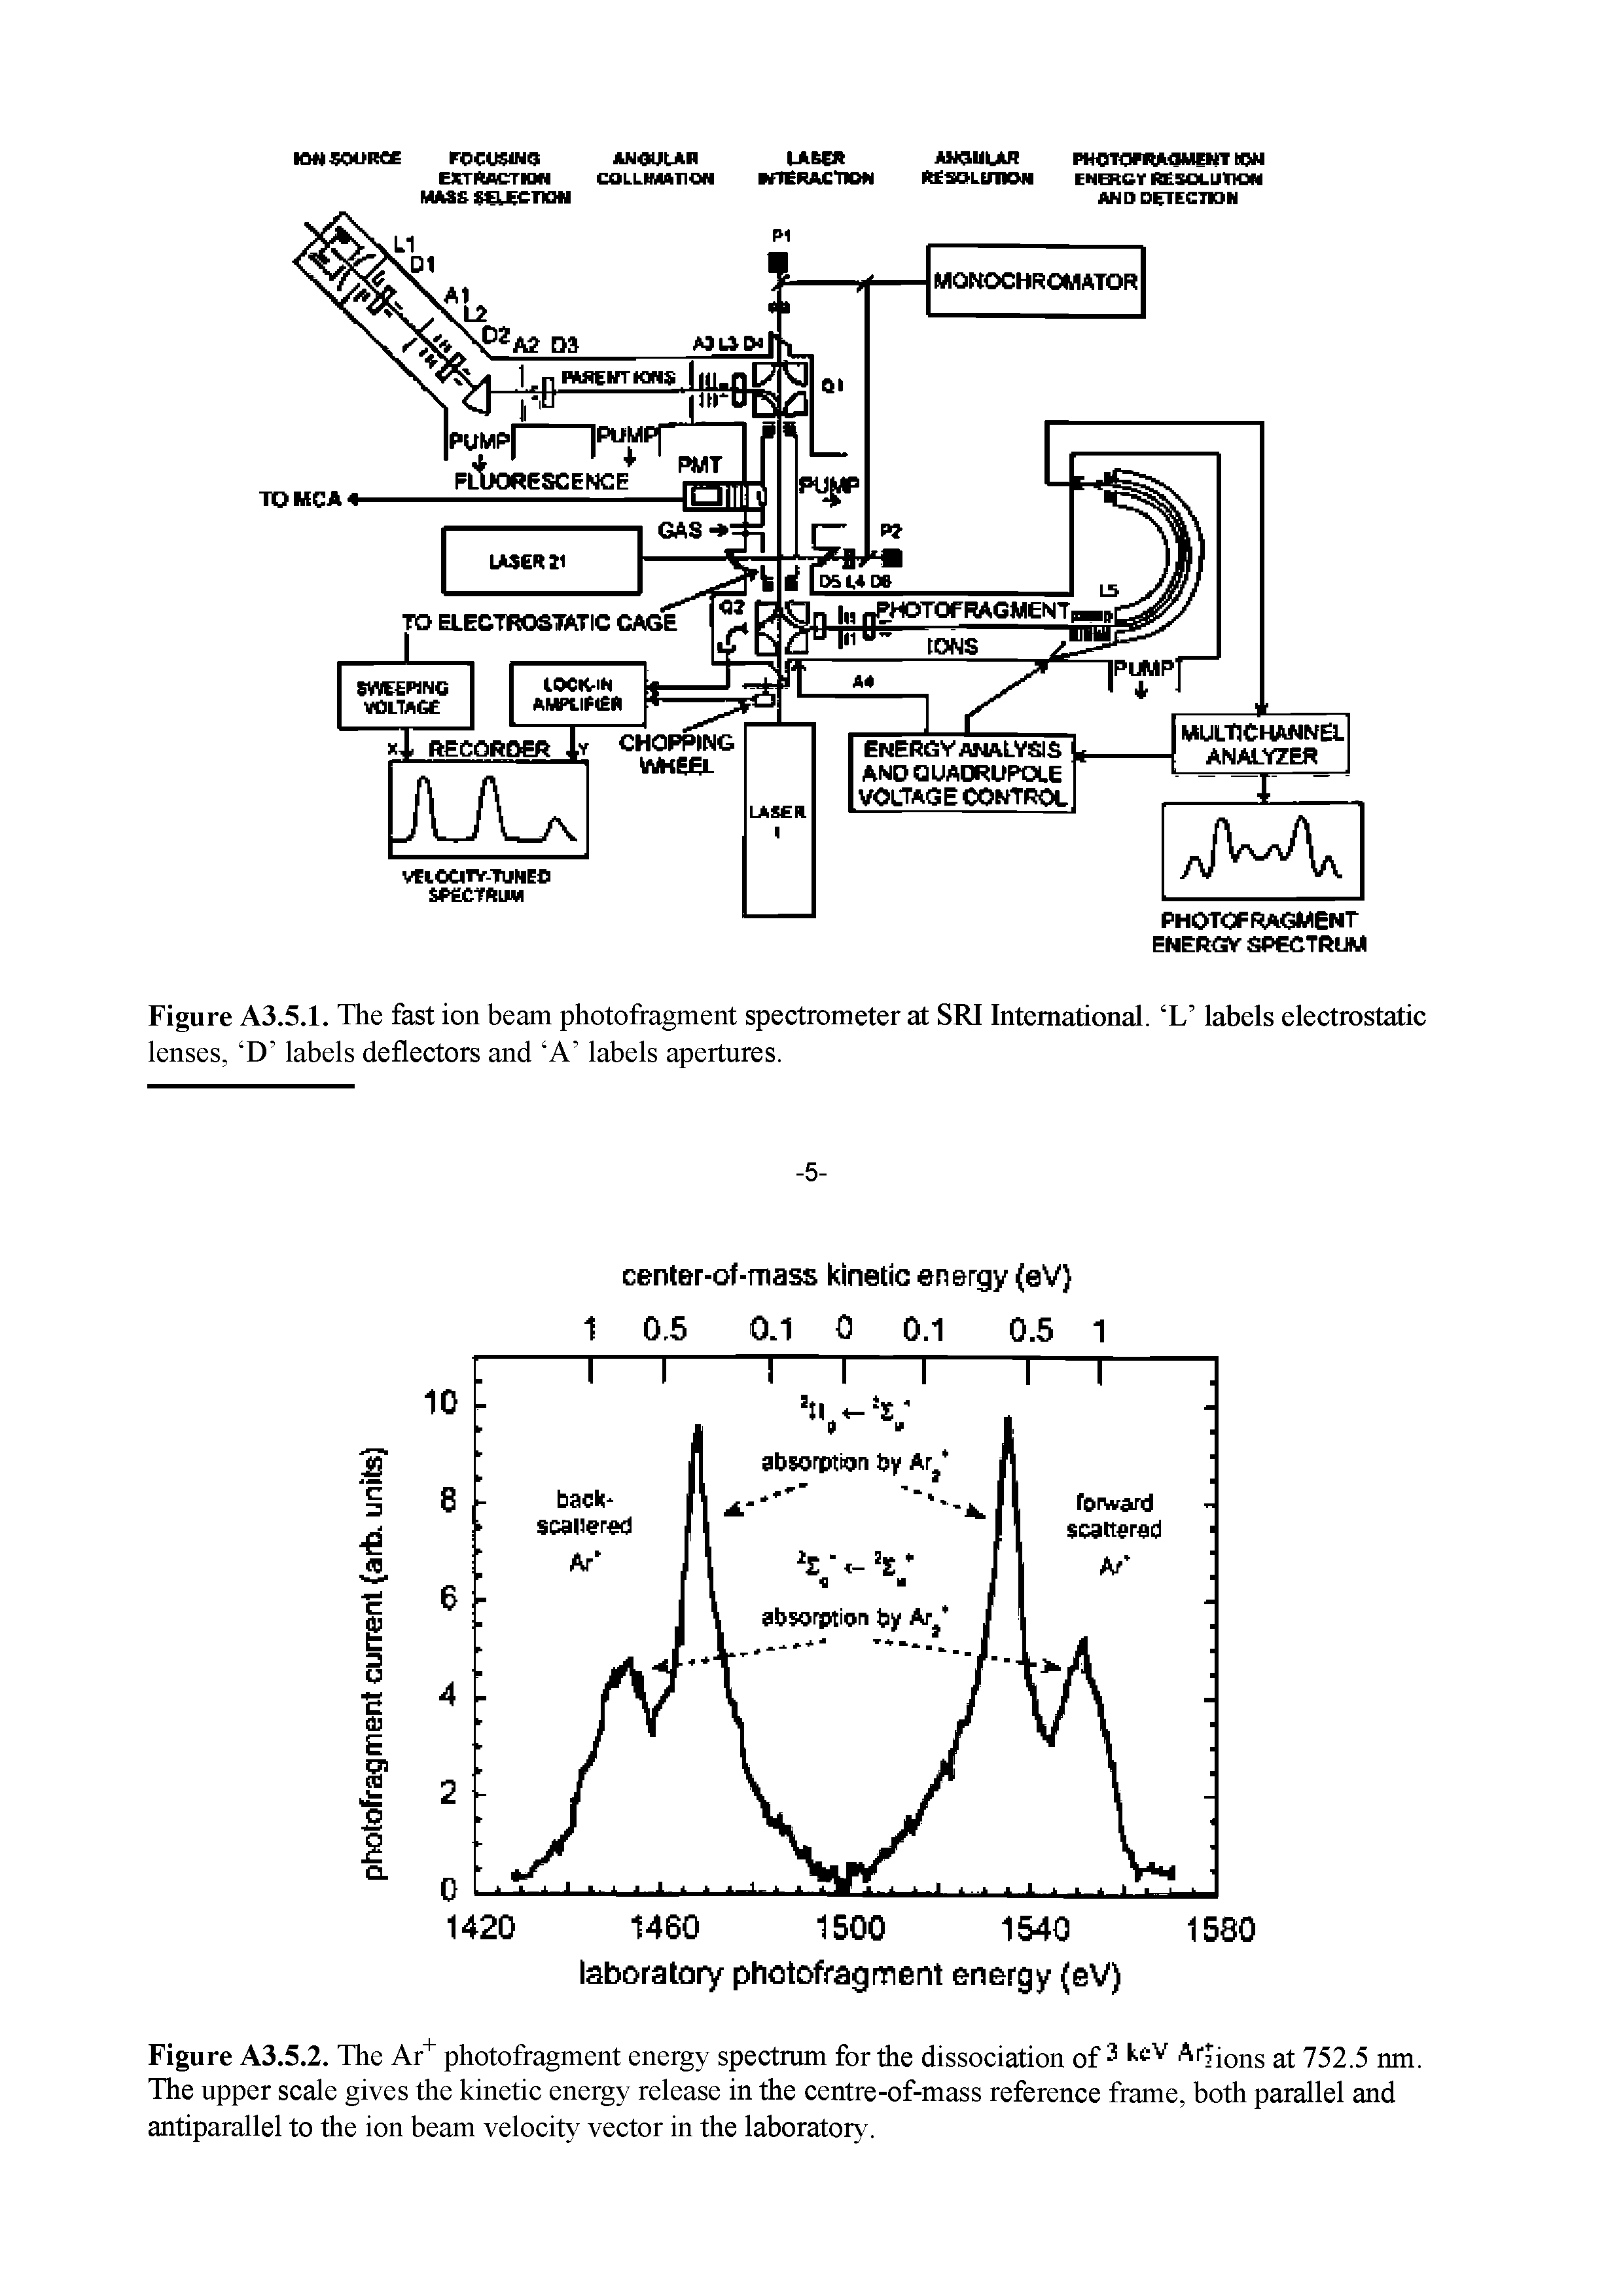 Figure A3.5.2. The Ar" photofragment energy spectrum for the dissociation of ions at 752.5 nm. The upper scale gives the kinetic energy release in the centre-of-mass reference frame, both parallel and antiparallel to the ion beam velocity vector in the laboratory.